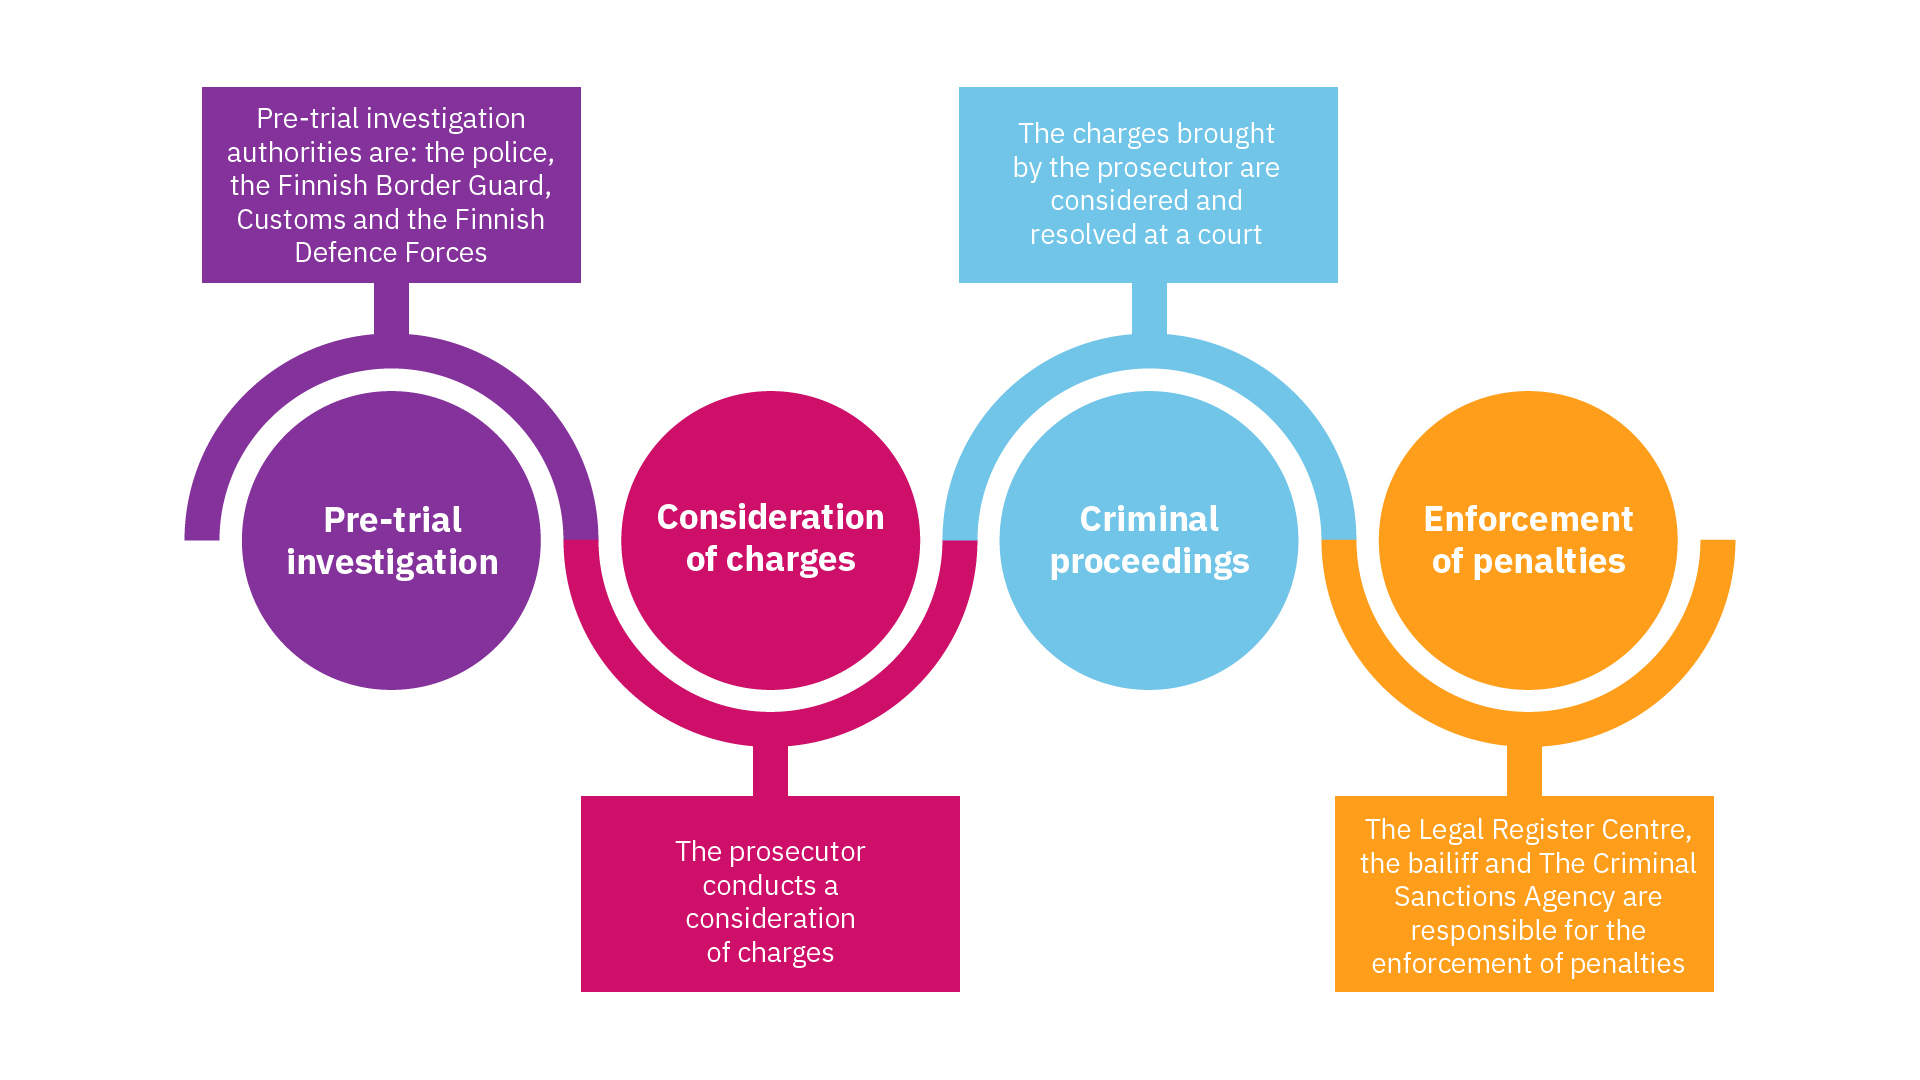 The processing of a criminal matter comprises four stages: pre-trial investigation, consideration of charges, court hearing and enforcement of penalties. 1. Pre-trial investigation: Pre-trial investigation authorities are: the police, the Finnish Border Guard, Customs and the Finnish Defence Forces. 2. Consideration of charges: The prosecutor conducts a consideration of charges. 3. Criminal proceedings: The charges brought by the prosecutor are considered and resolved at a court. 4. Enforcement of penalties: The Legal Register Centre, the bailiff and The Criminal Sanctions Agency are responsible for the  enforcement of penalties.